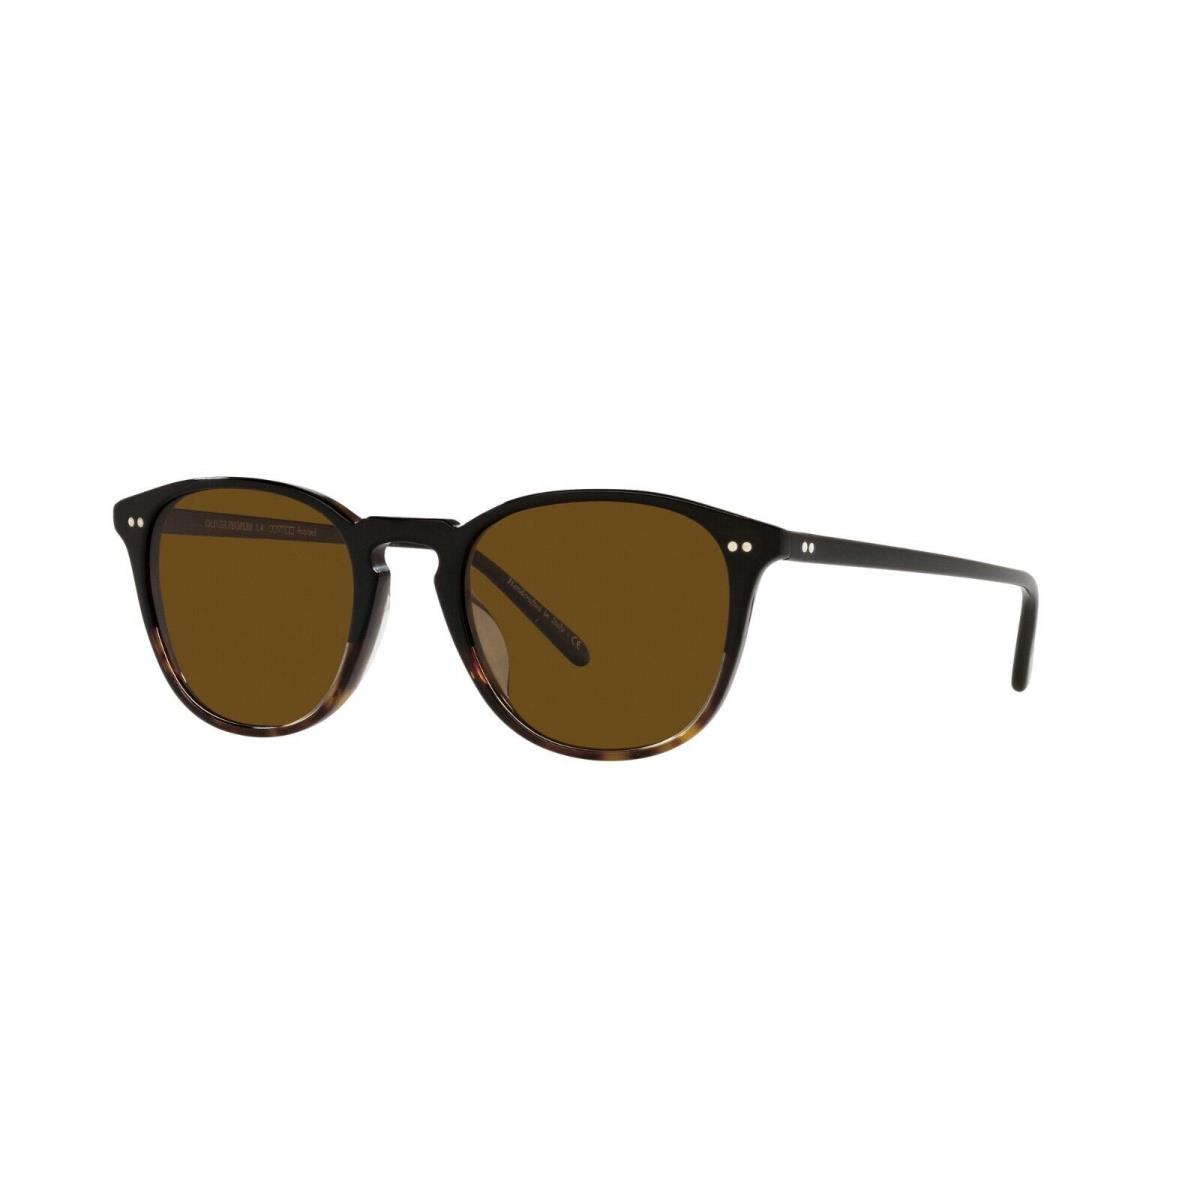 Oliver Peoples Forman L.a. OV 5414SU Black Shaded/brown Polarized Sunglasses